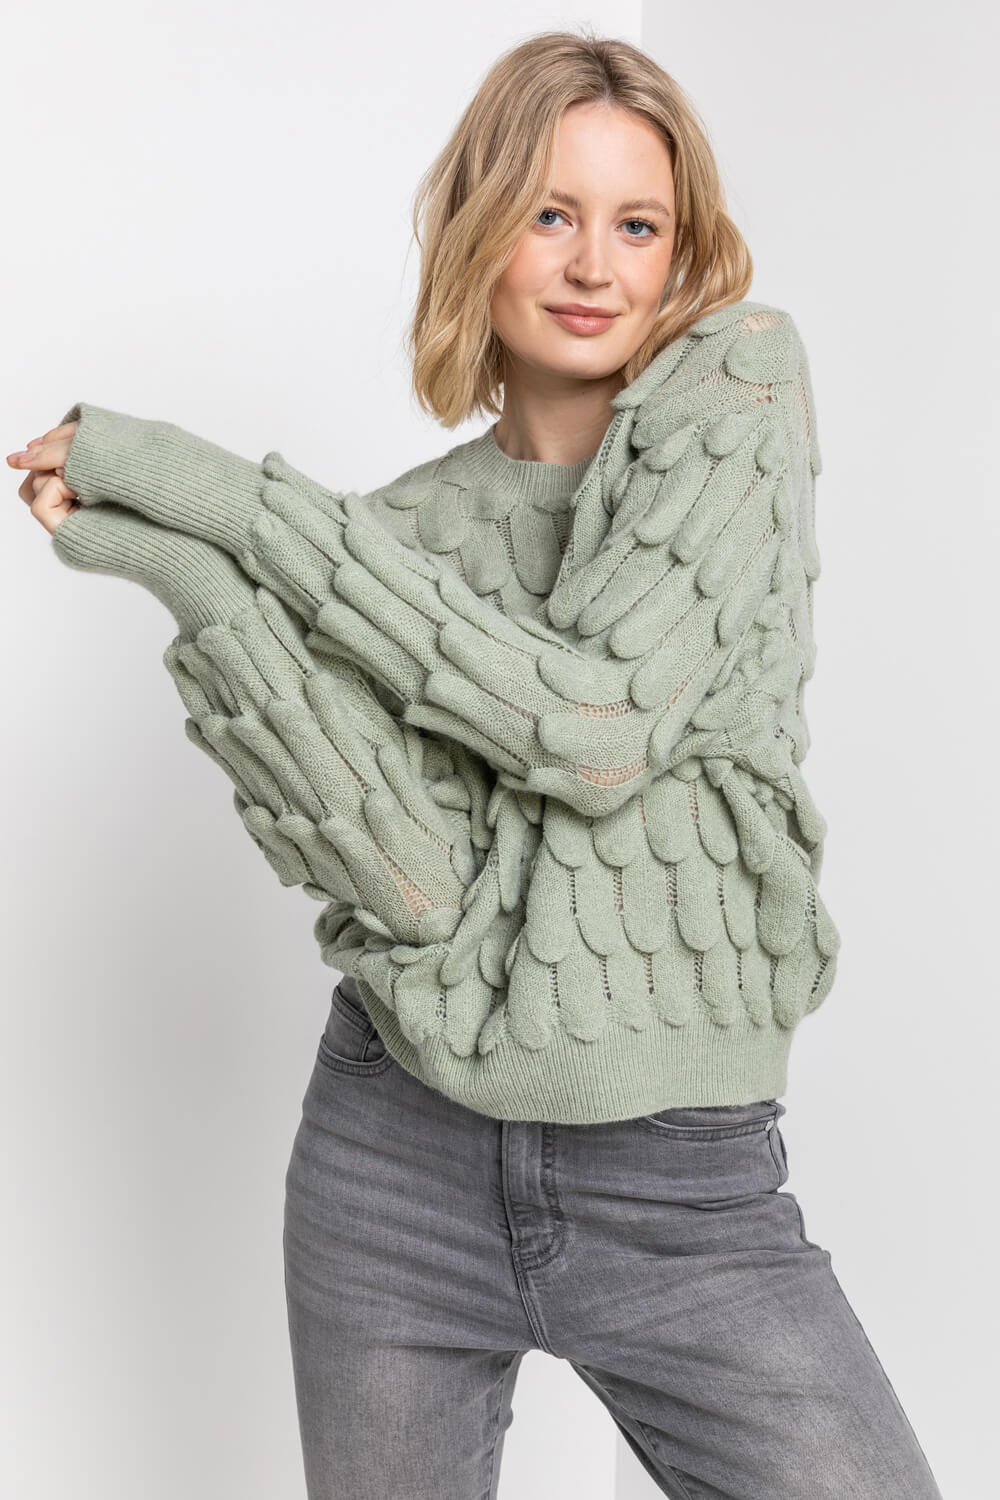 Sage Scallop Textured Knit Jumper, Image 5 of 5